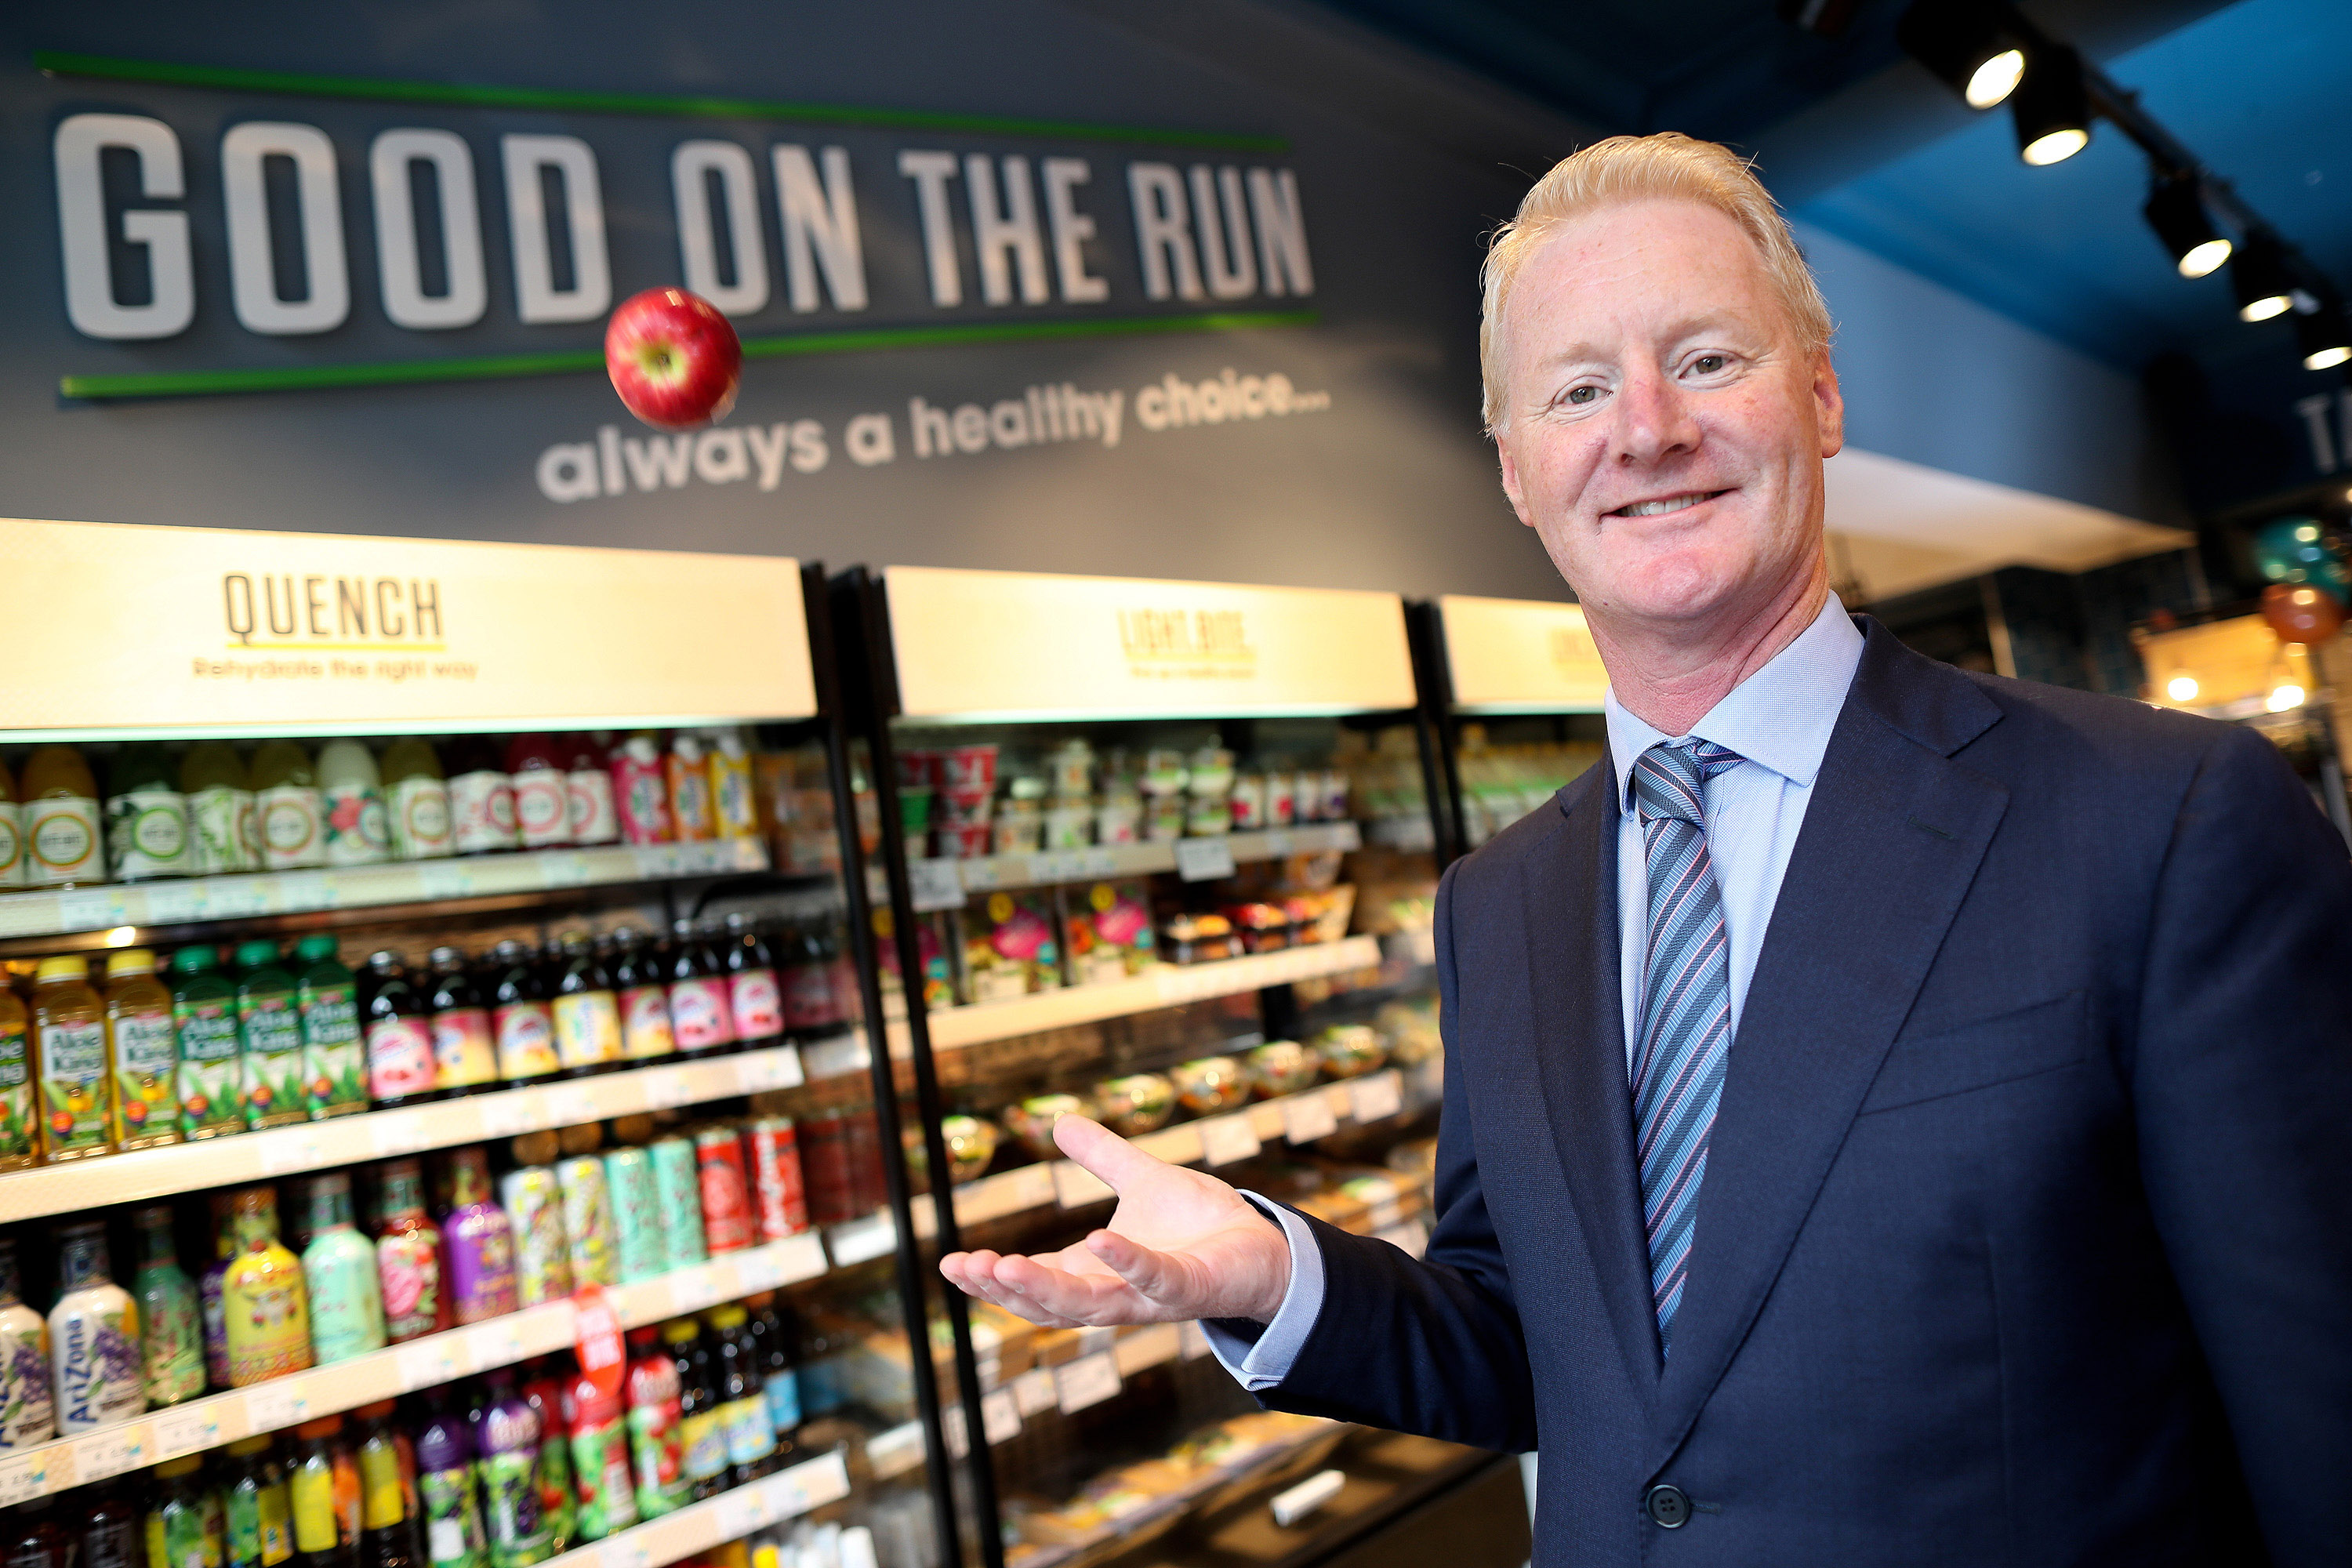 23/09/2016 NO REPRO FEE, MAXWELLS Centra Marketing Director Ray Kelly pictured at the launch of Centra’s new brand positioning ‘Live Every Day’.  Ireland’s leading convenience retailer Centra has announced its new ‘Live Every Day’ brand positioning, which will result in a radical transformation of the brand following significant investment. The transformation will see the introduction of healthier convenient food ranges, in-store renovations and underpinned by a heavyweight marketing campaign. ‘Live Every Day’ is about helping shoppers live in the moment and allowing them to make the most out of every day. PIC: NO FEE, MAXWELLPHOTOGRAPHY.IE